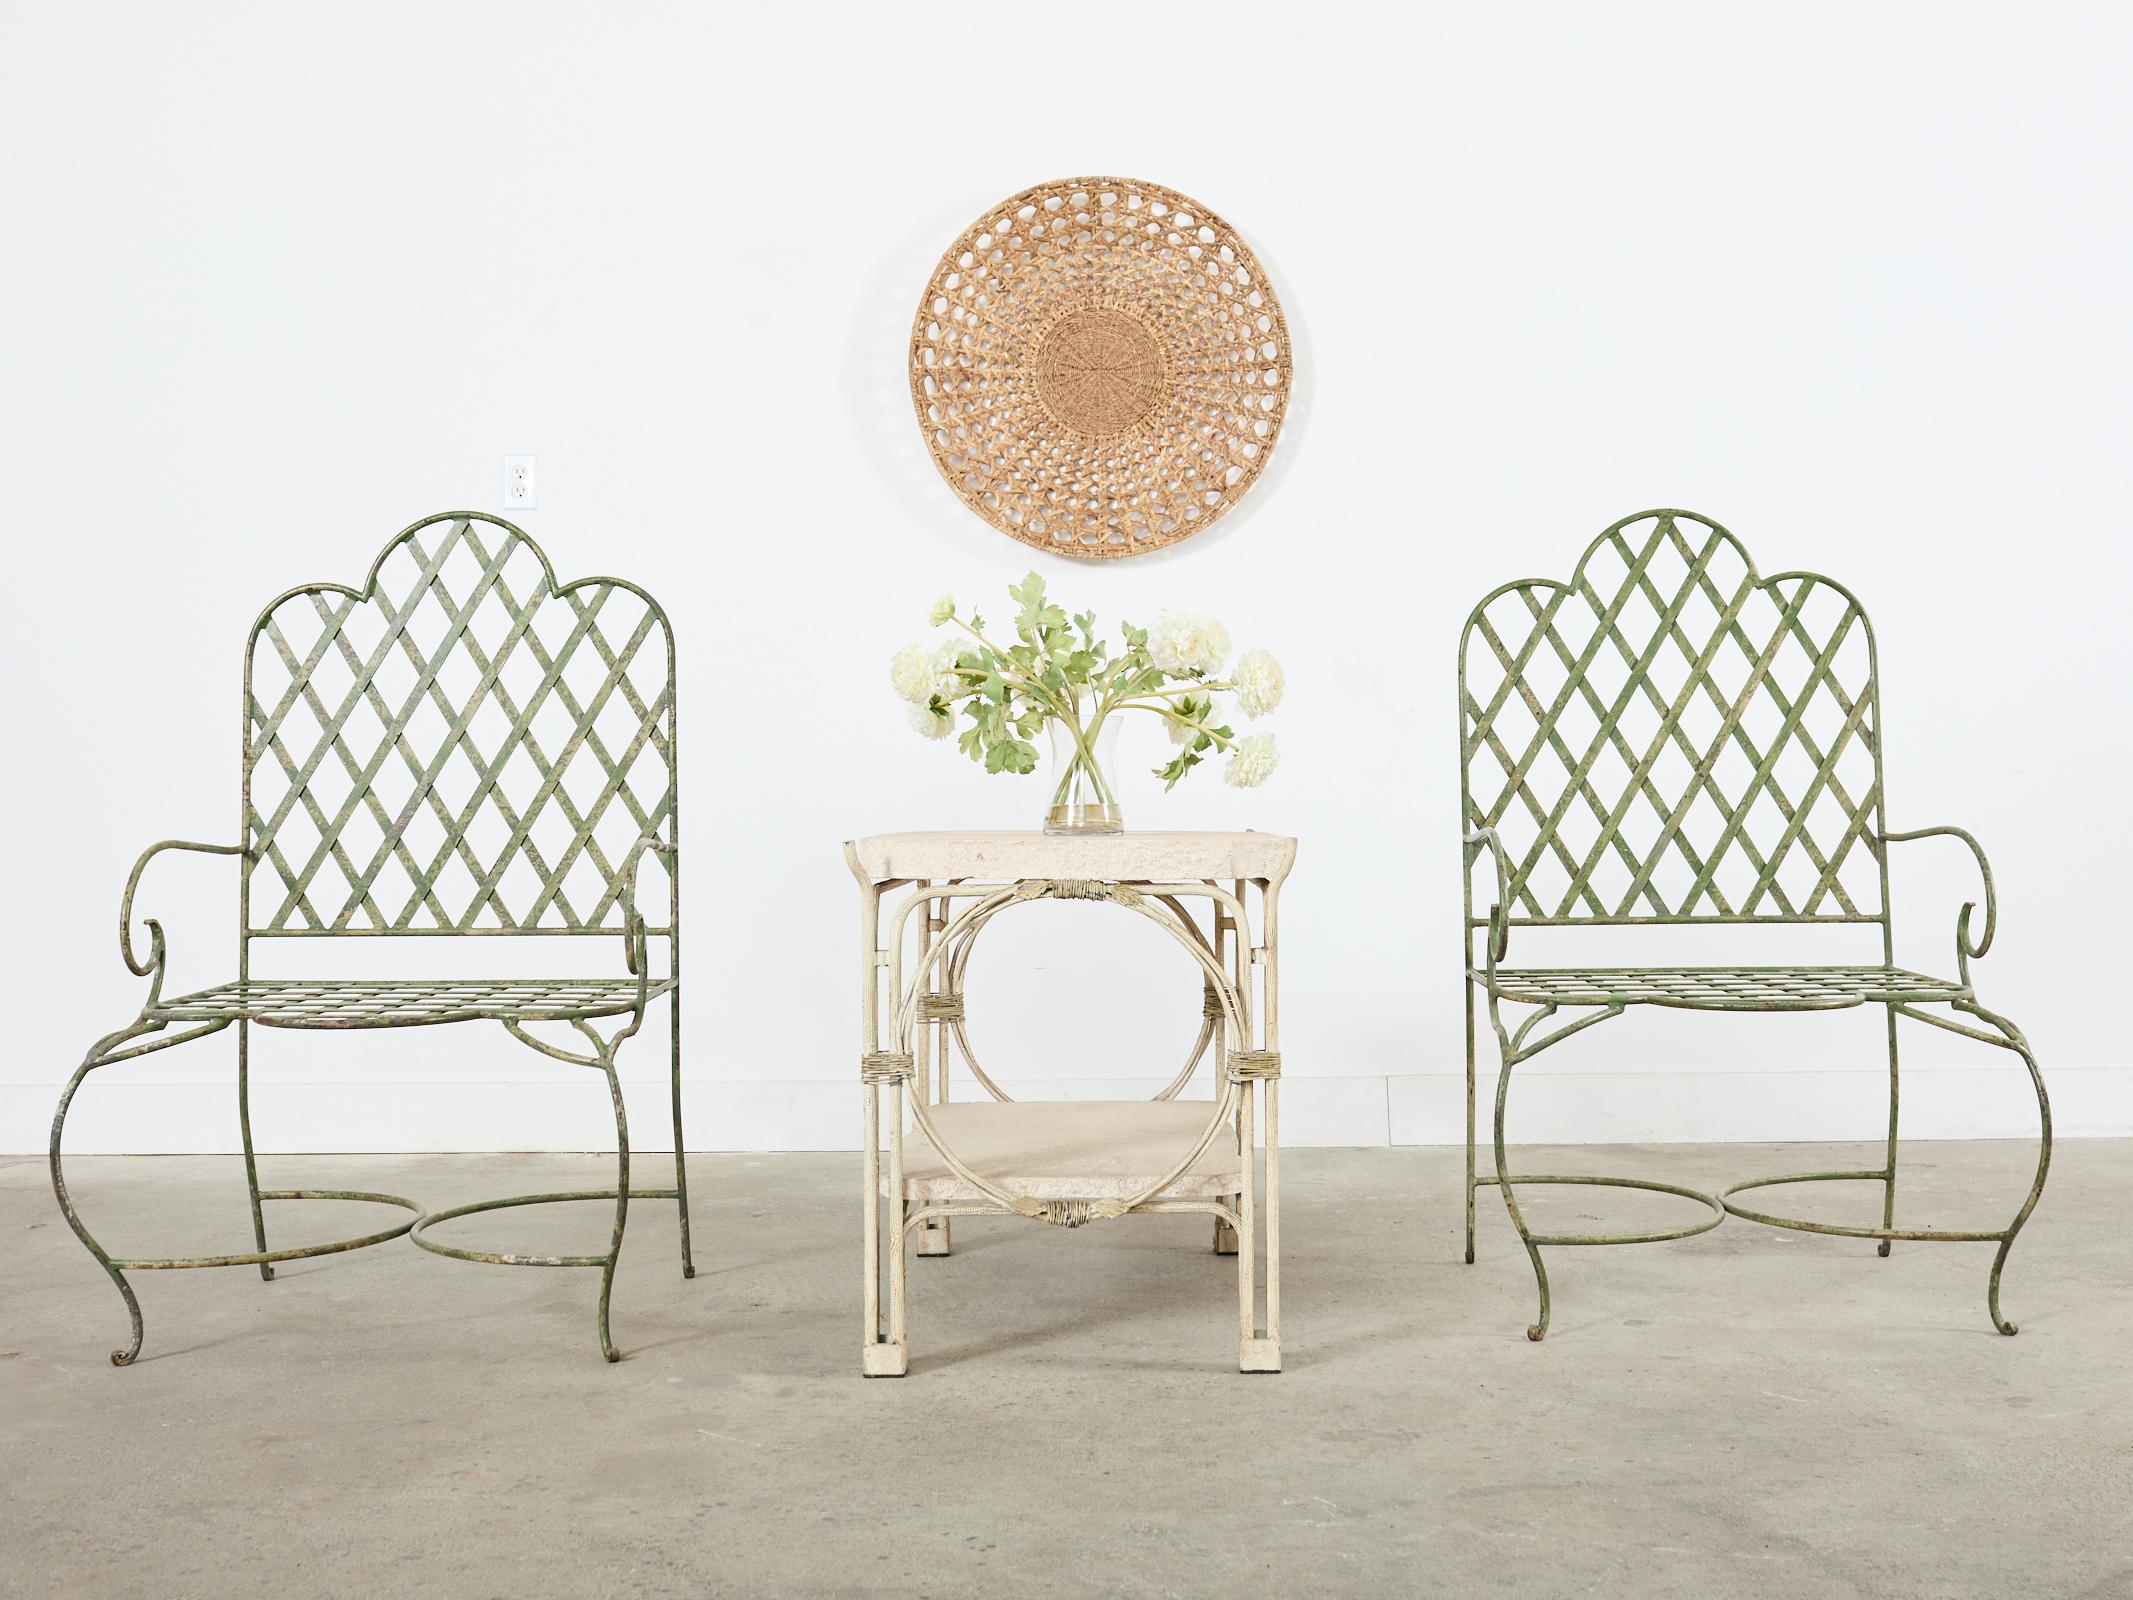 Whimsical set of five iron patio and garden armchairs made in the style and manner of Rose Tarlow. The chairs feature large hand-crafted iron frames with a neoclassical style lattice inset on the seat and backs. The frames have a gracefully curved